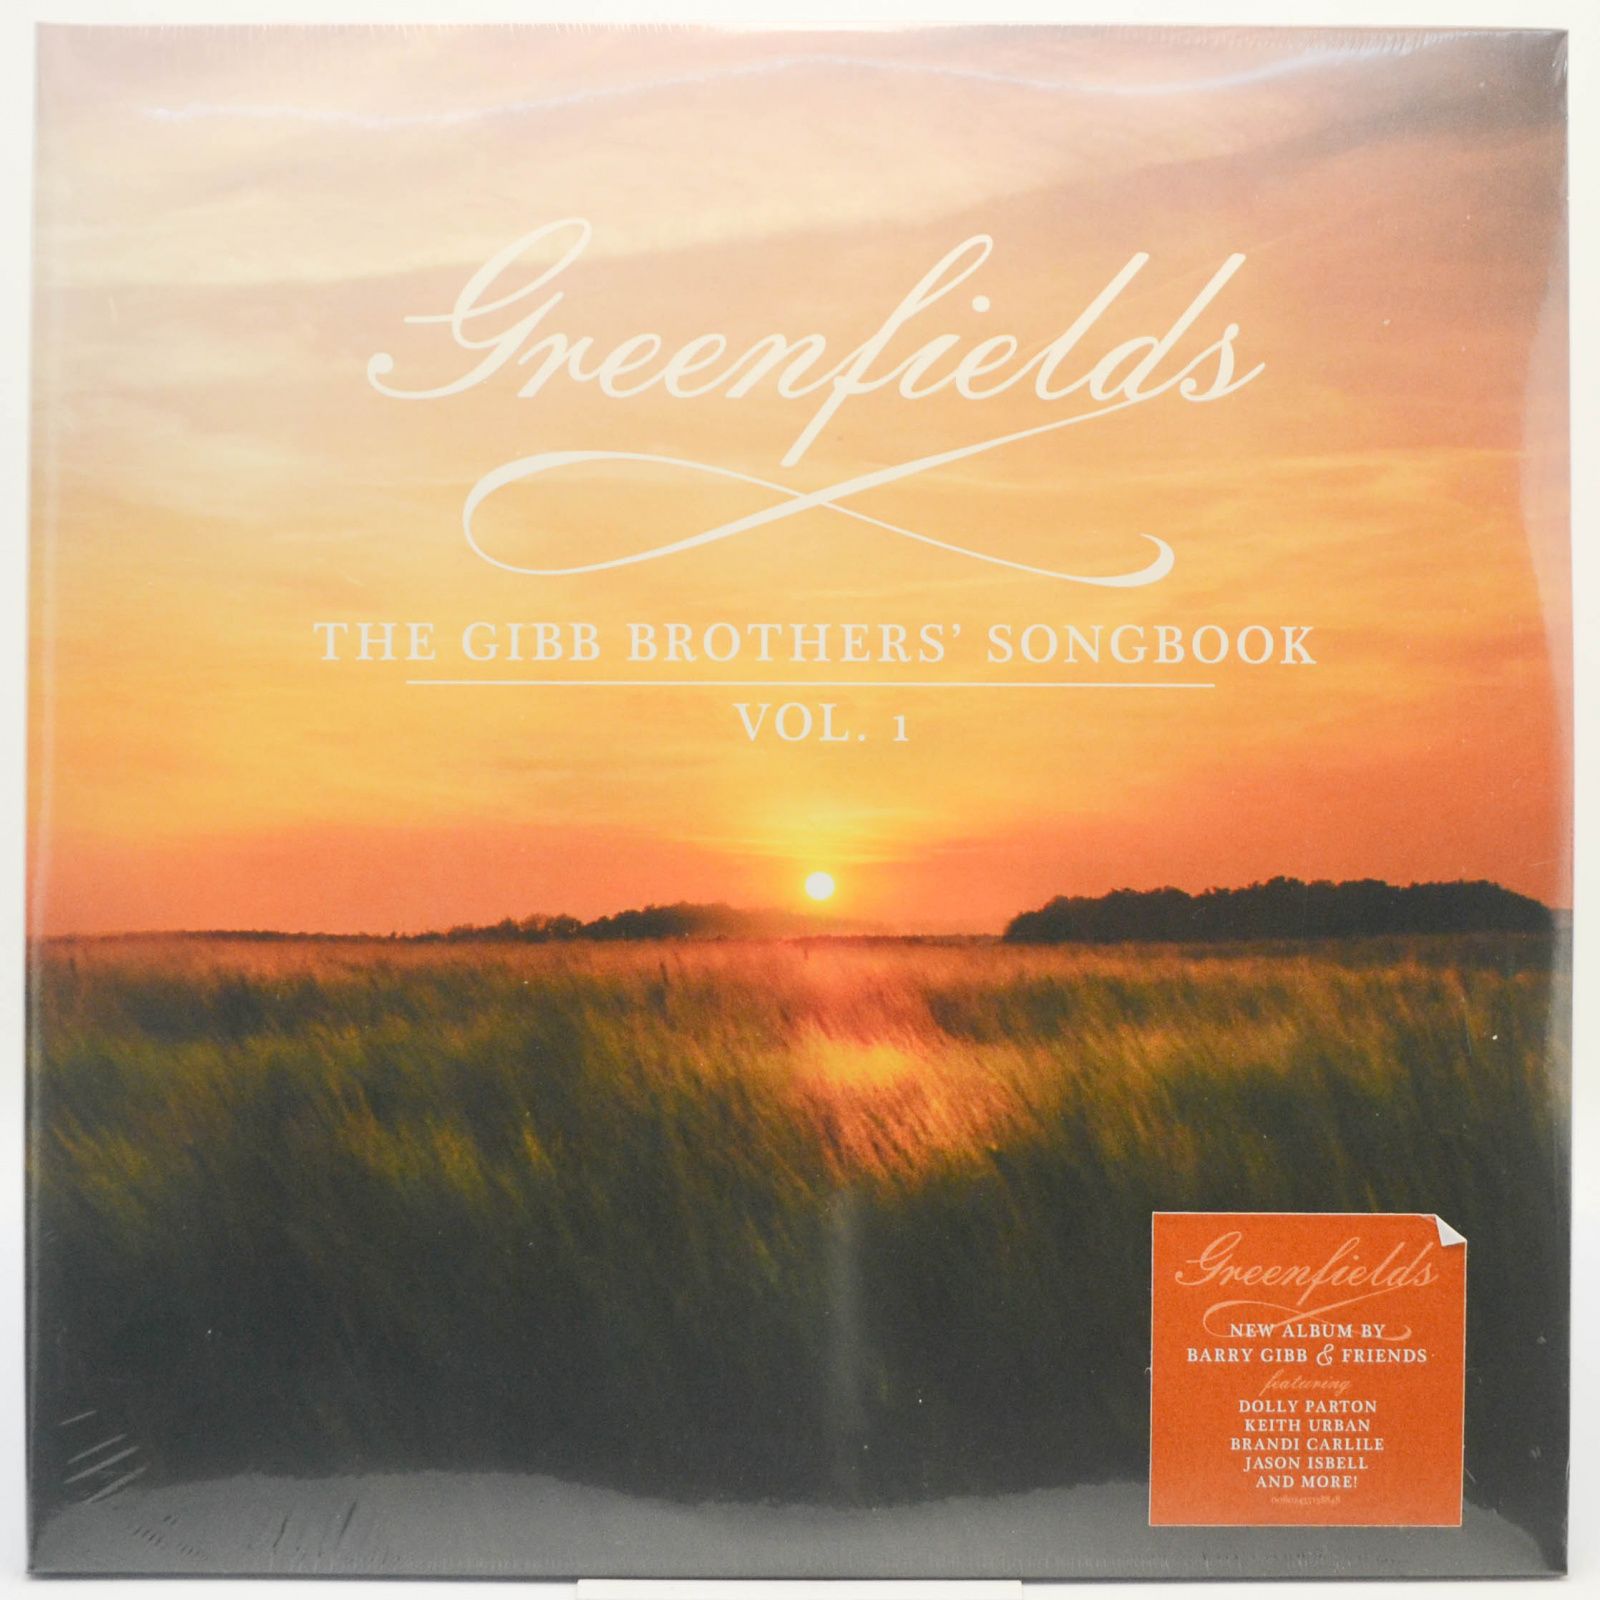 Greenfields: The Gibb Brothers' Songbook Vol. 1 (2LP), 2021